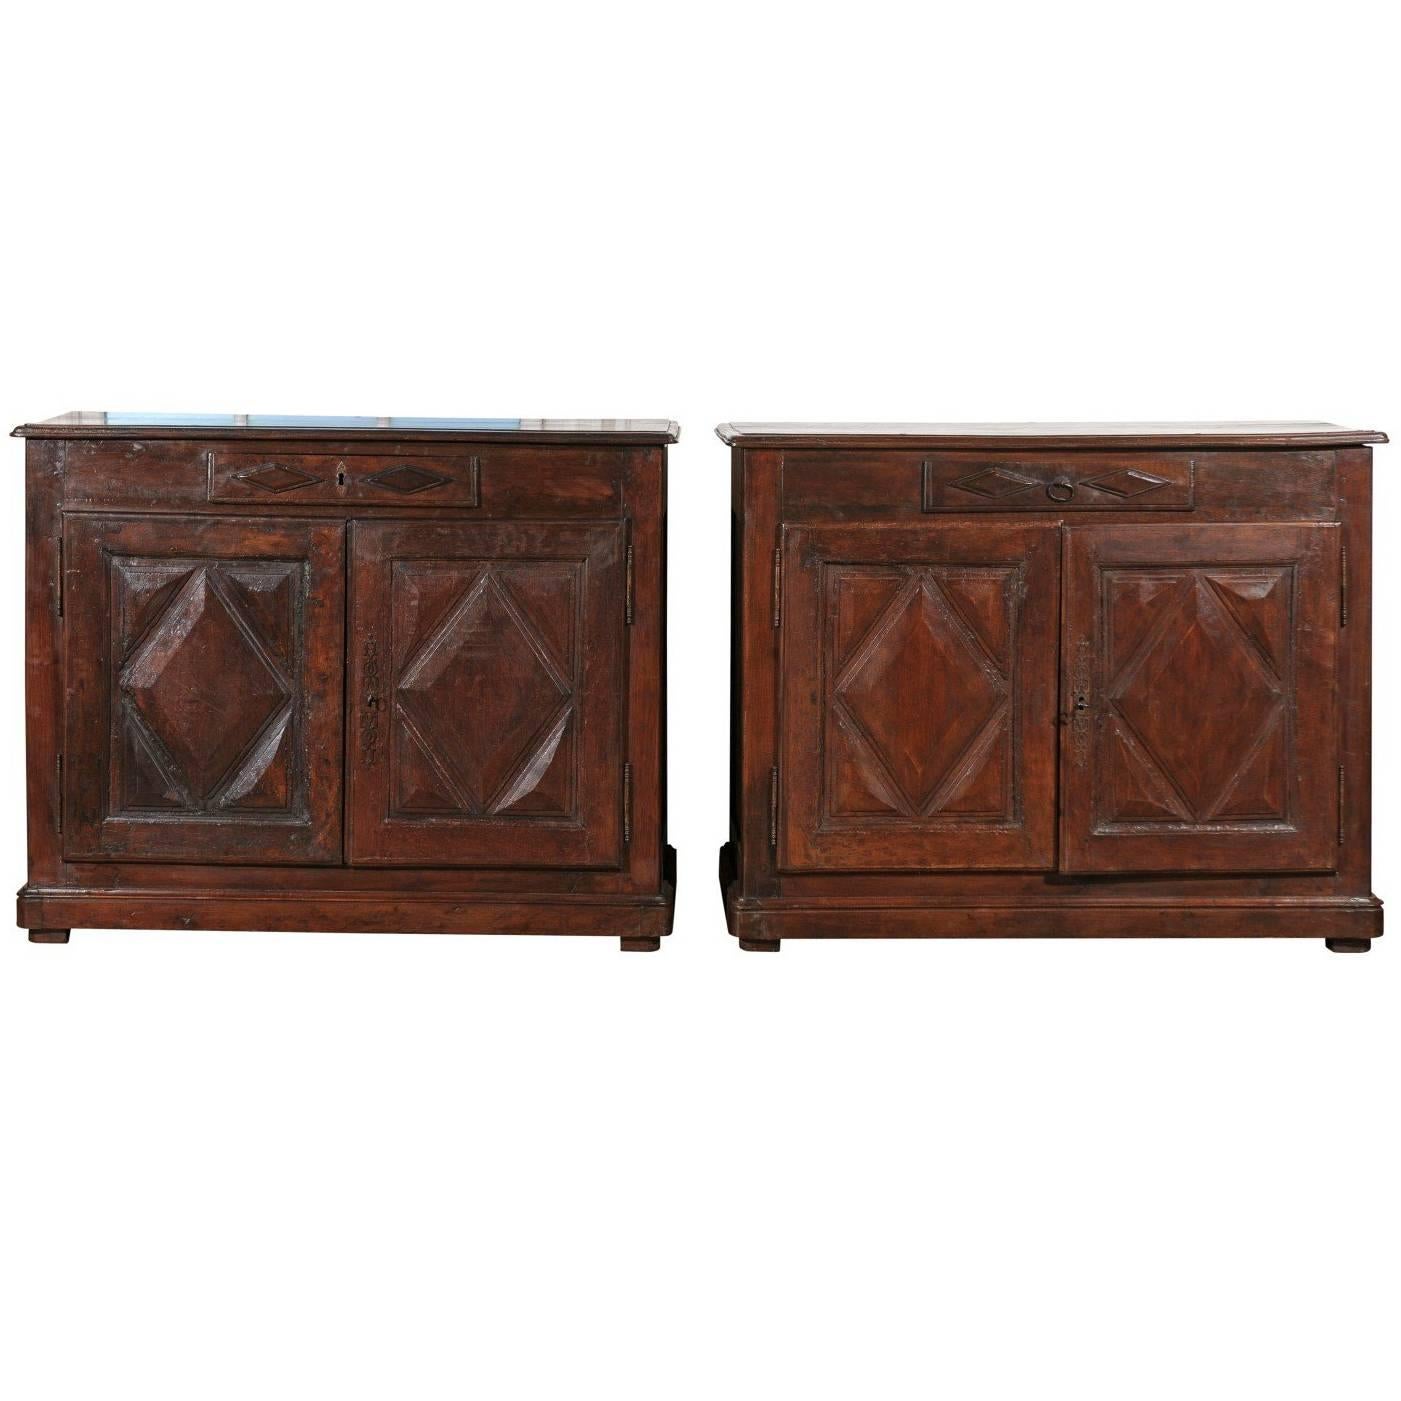 Pair of French 18th Century Walnut Buffets with Single Drawer and Diamond Motifs